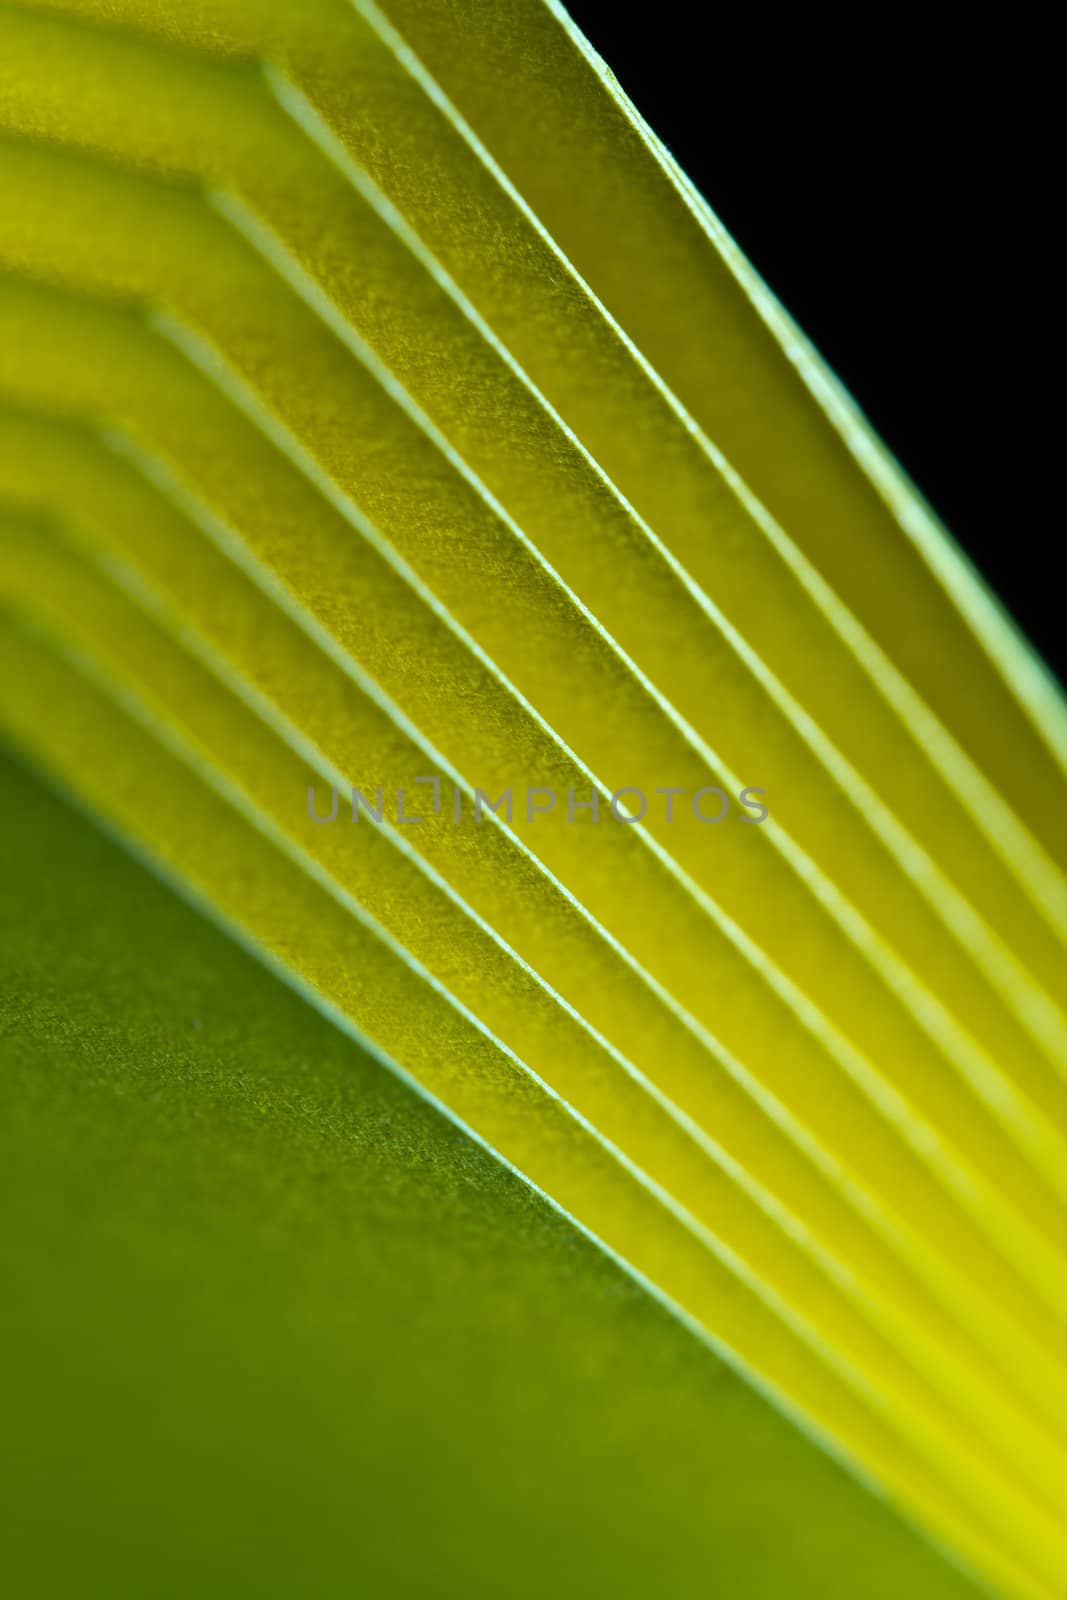 texture of the yellow A4 paper in portrait orientation with black background